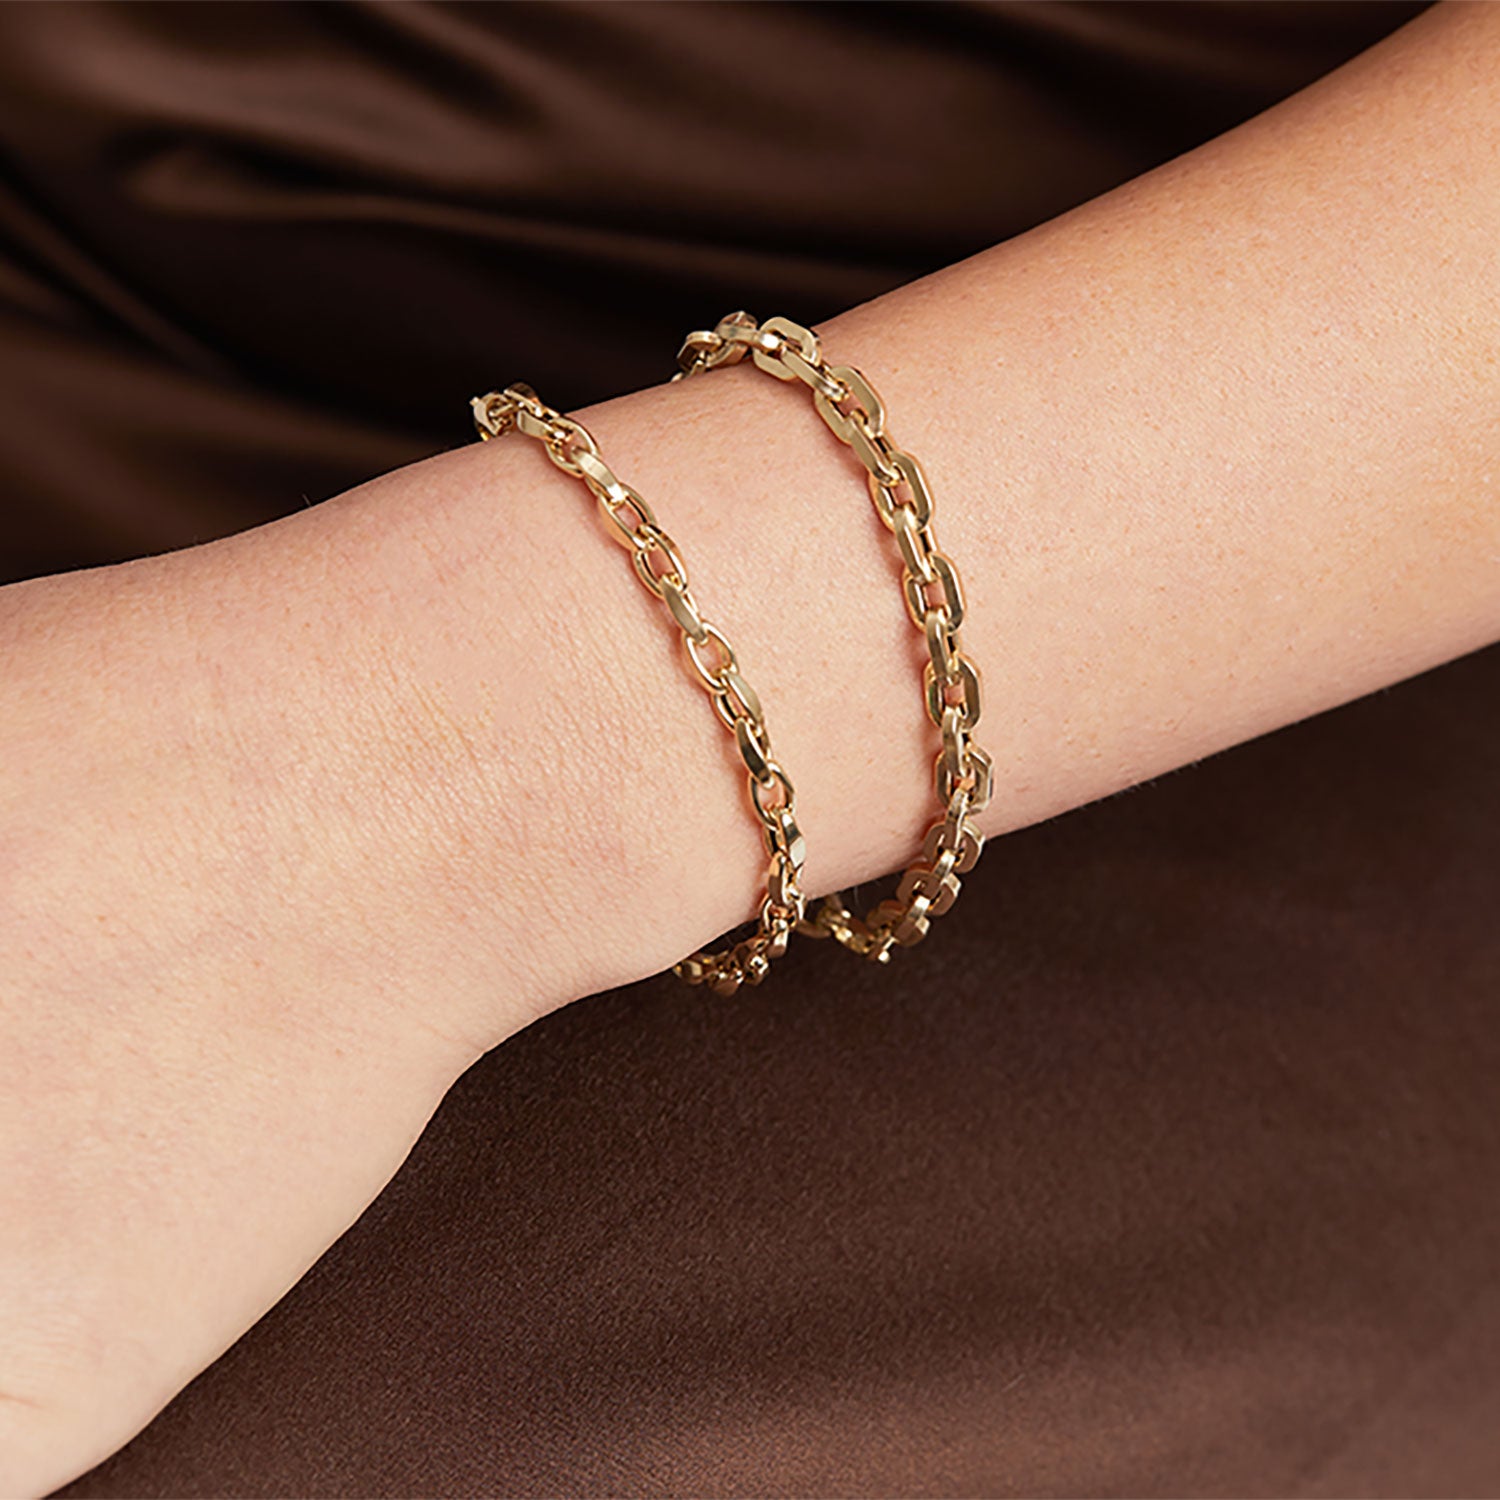 Ethlyn 2pcs/lot 18K Gold Plated Kids Baby Expandable Adjustable Charm  Bangles &bracelets, 5cm, Metal : Buy Online at Best Price in KSA - Souq is  now Amazon.sa: Fashion